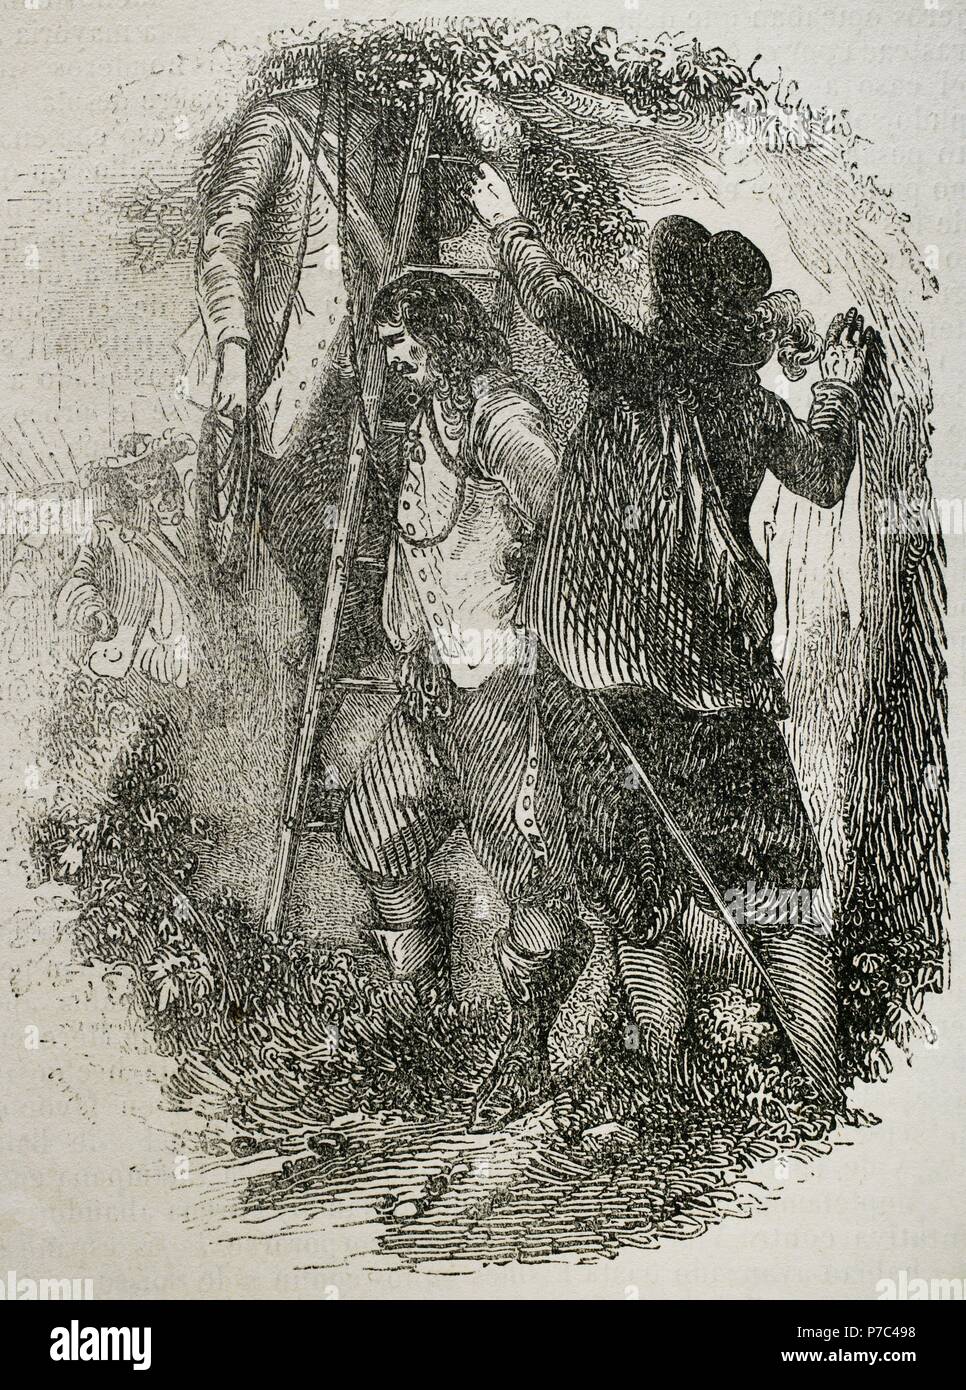 Armand-Charles de La Porte, Duc de La Meilleraye (1632-1713). French general, Grand Master and Captain General of Artillery. La Meilleraye orders the the envoy from Bordeaux to be hanged. Engraving. 19th century. Stock Photo